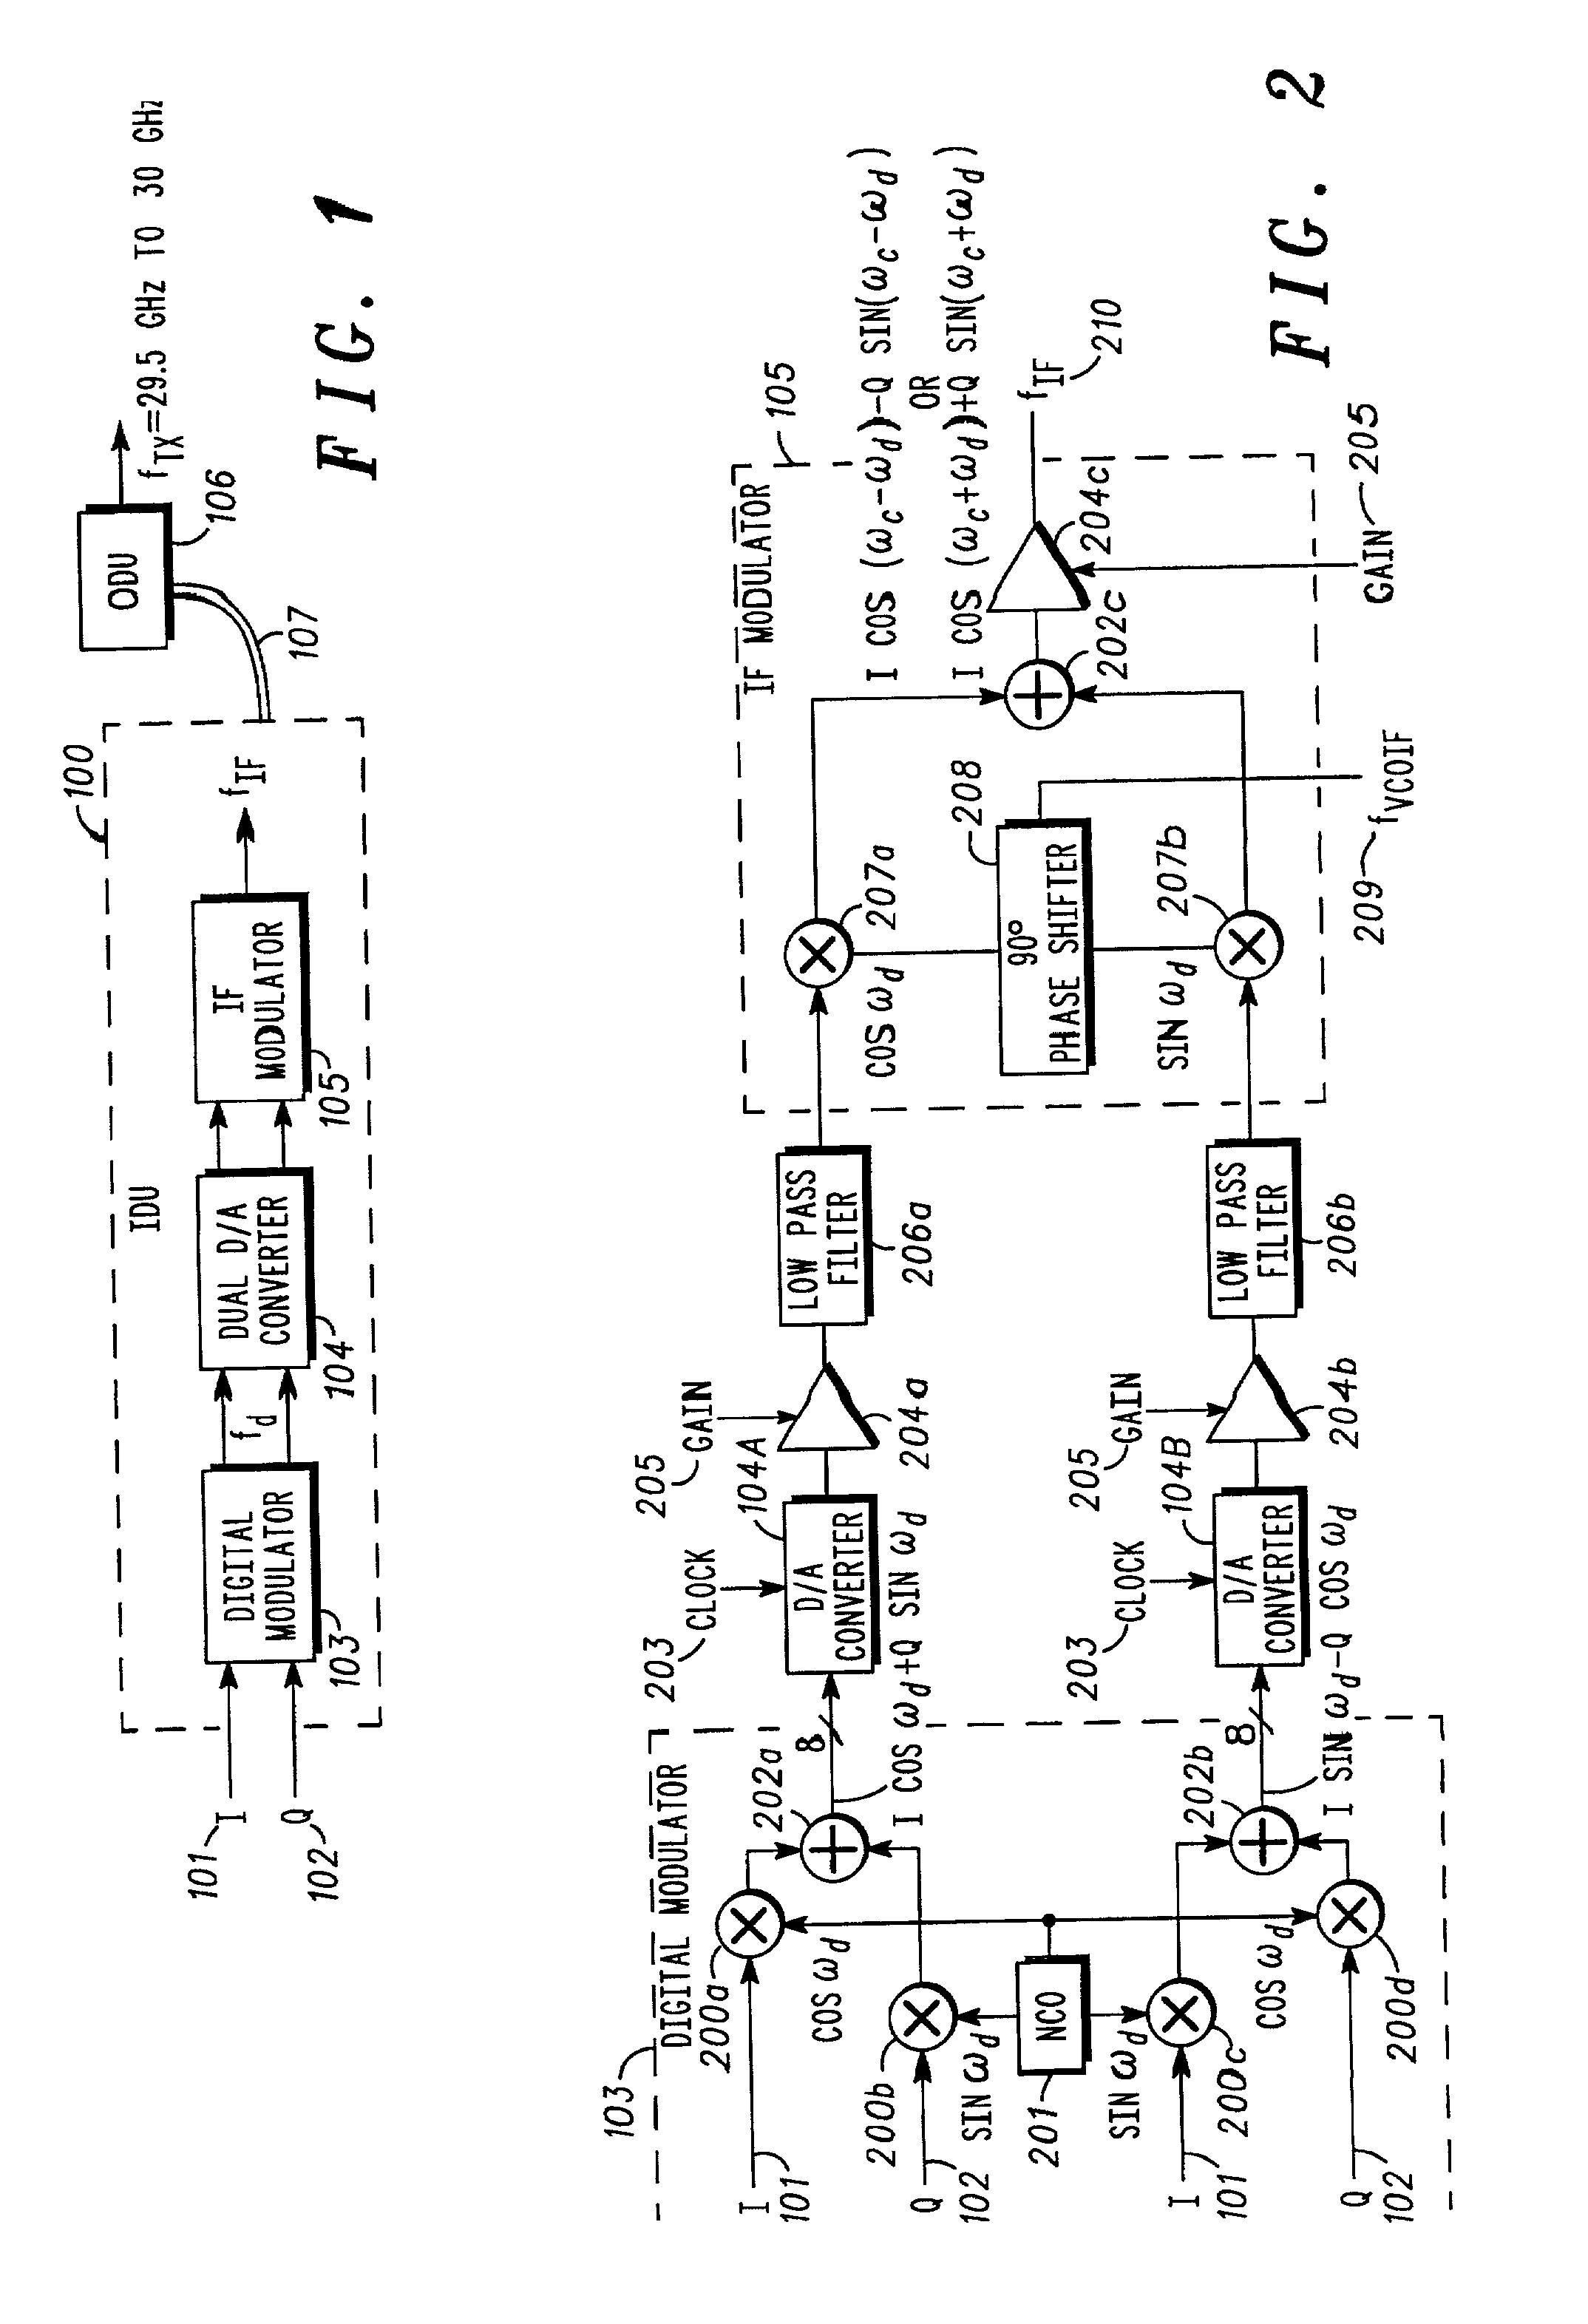 Modulation system for modulating data onto a carrier signal with offsets to compensate for doppler effect and allow a frequency synthesizing system to make steps equal to channel bandwidth